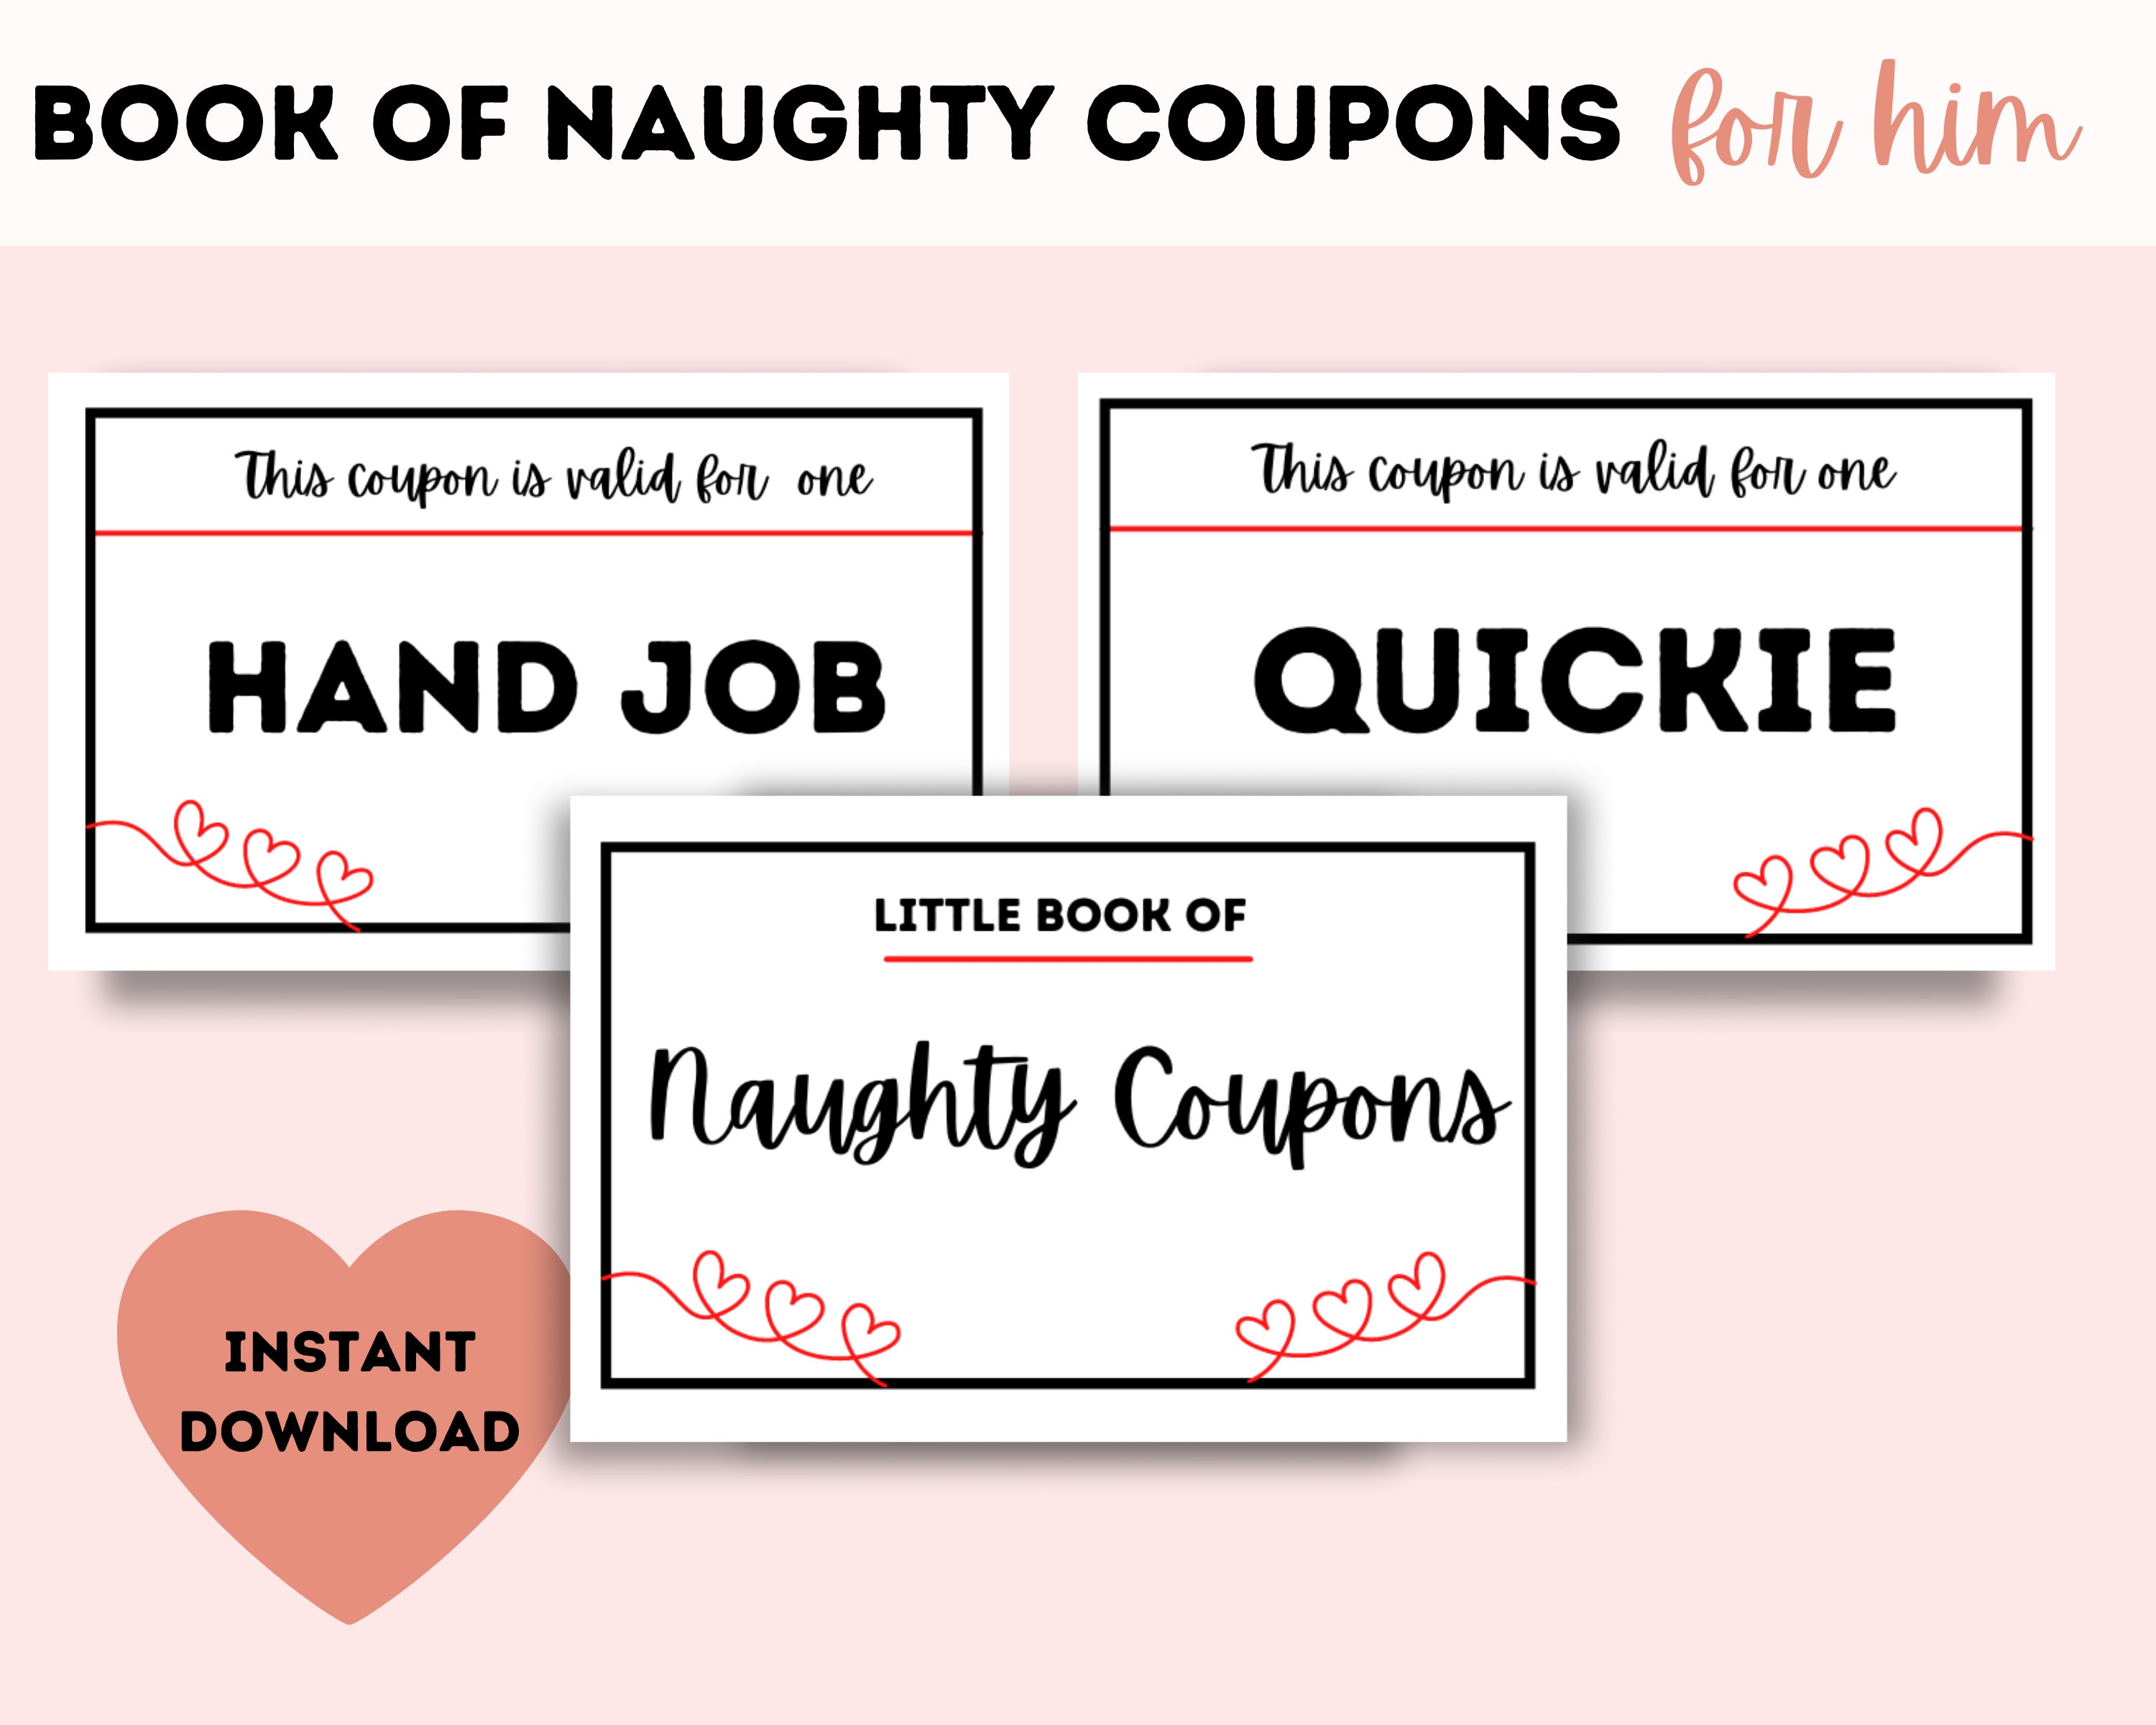 Birthday Sex Coupons Sex Coupons for Husband Birthday Gift photo